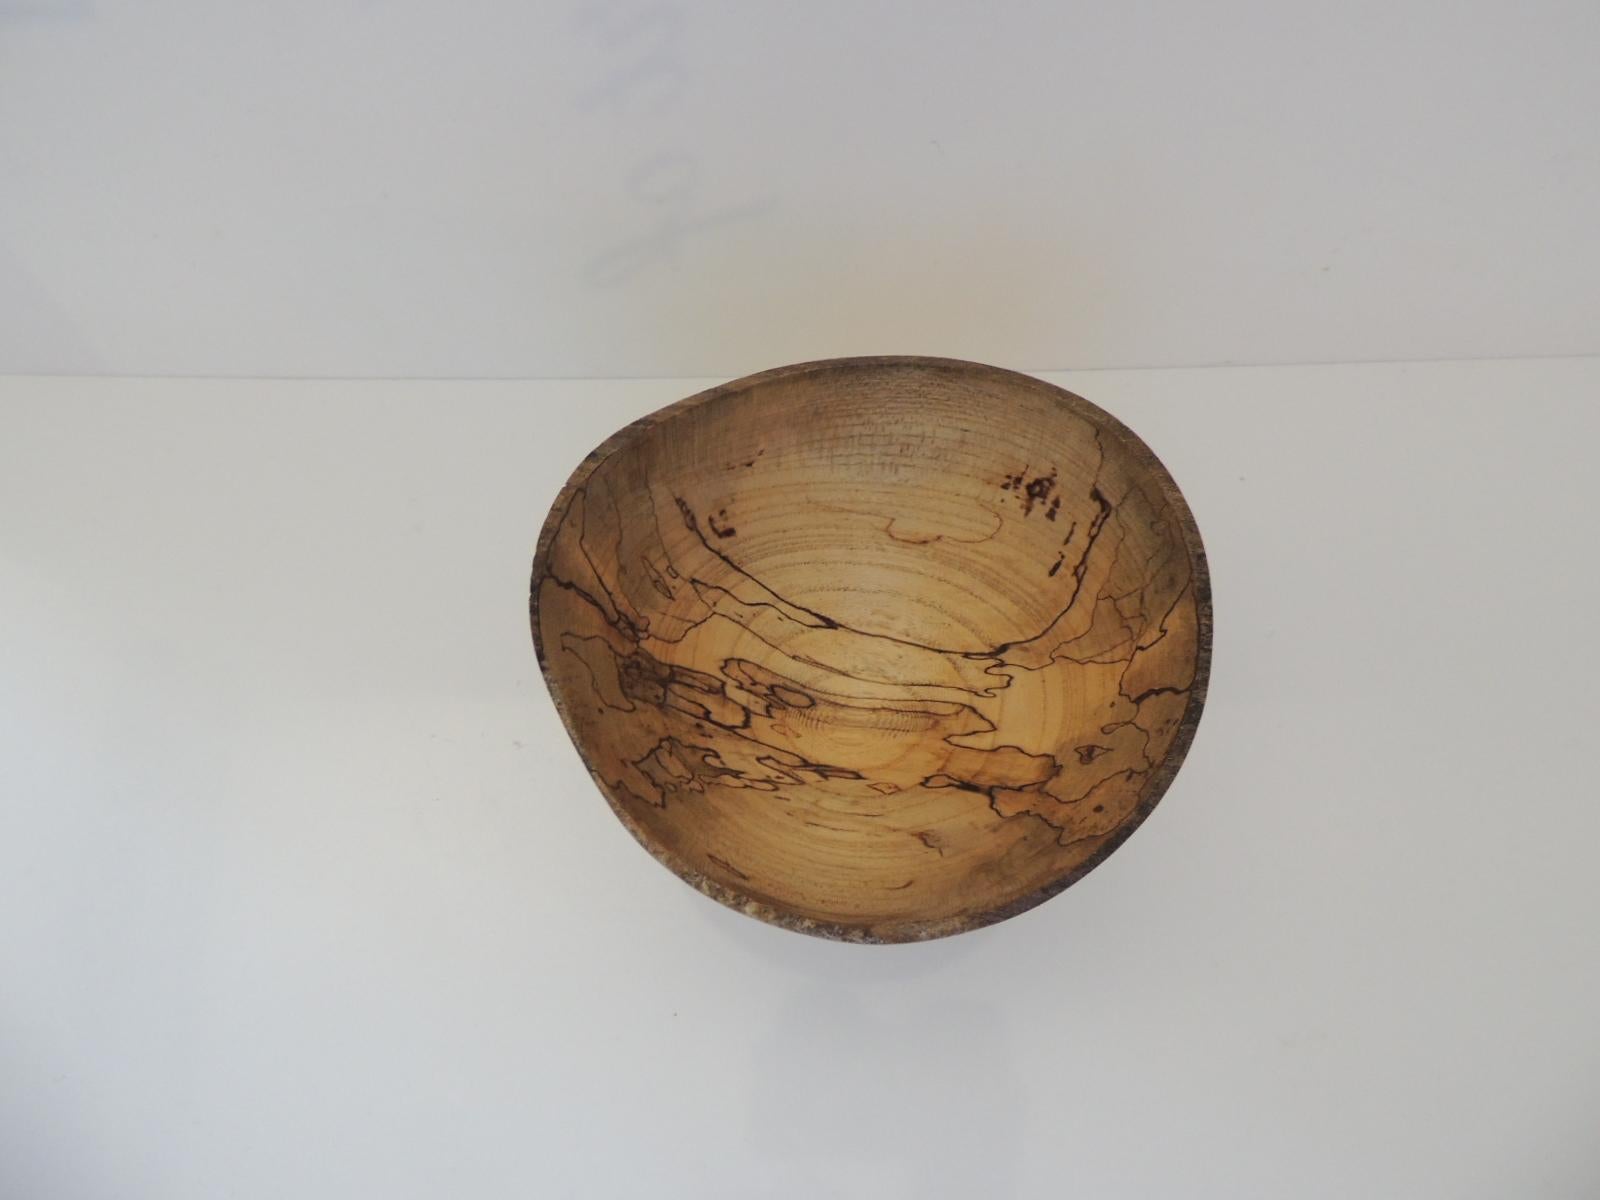 Artisanal Mid-Century Modern handcrafted bamboo decorative bowl.
Turche burned technique.
Signed: C. White
Size: 6